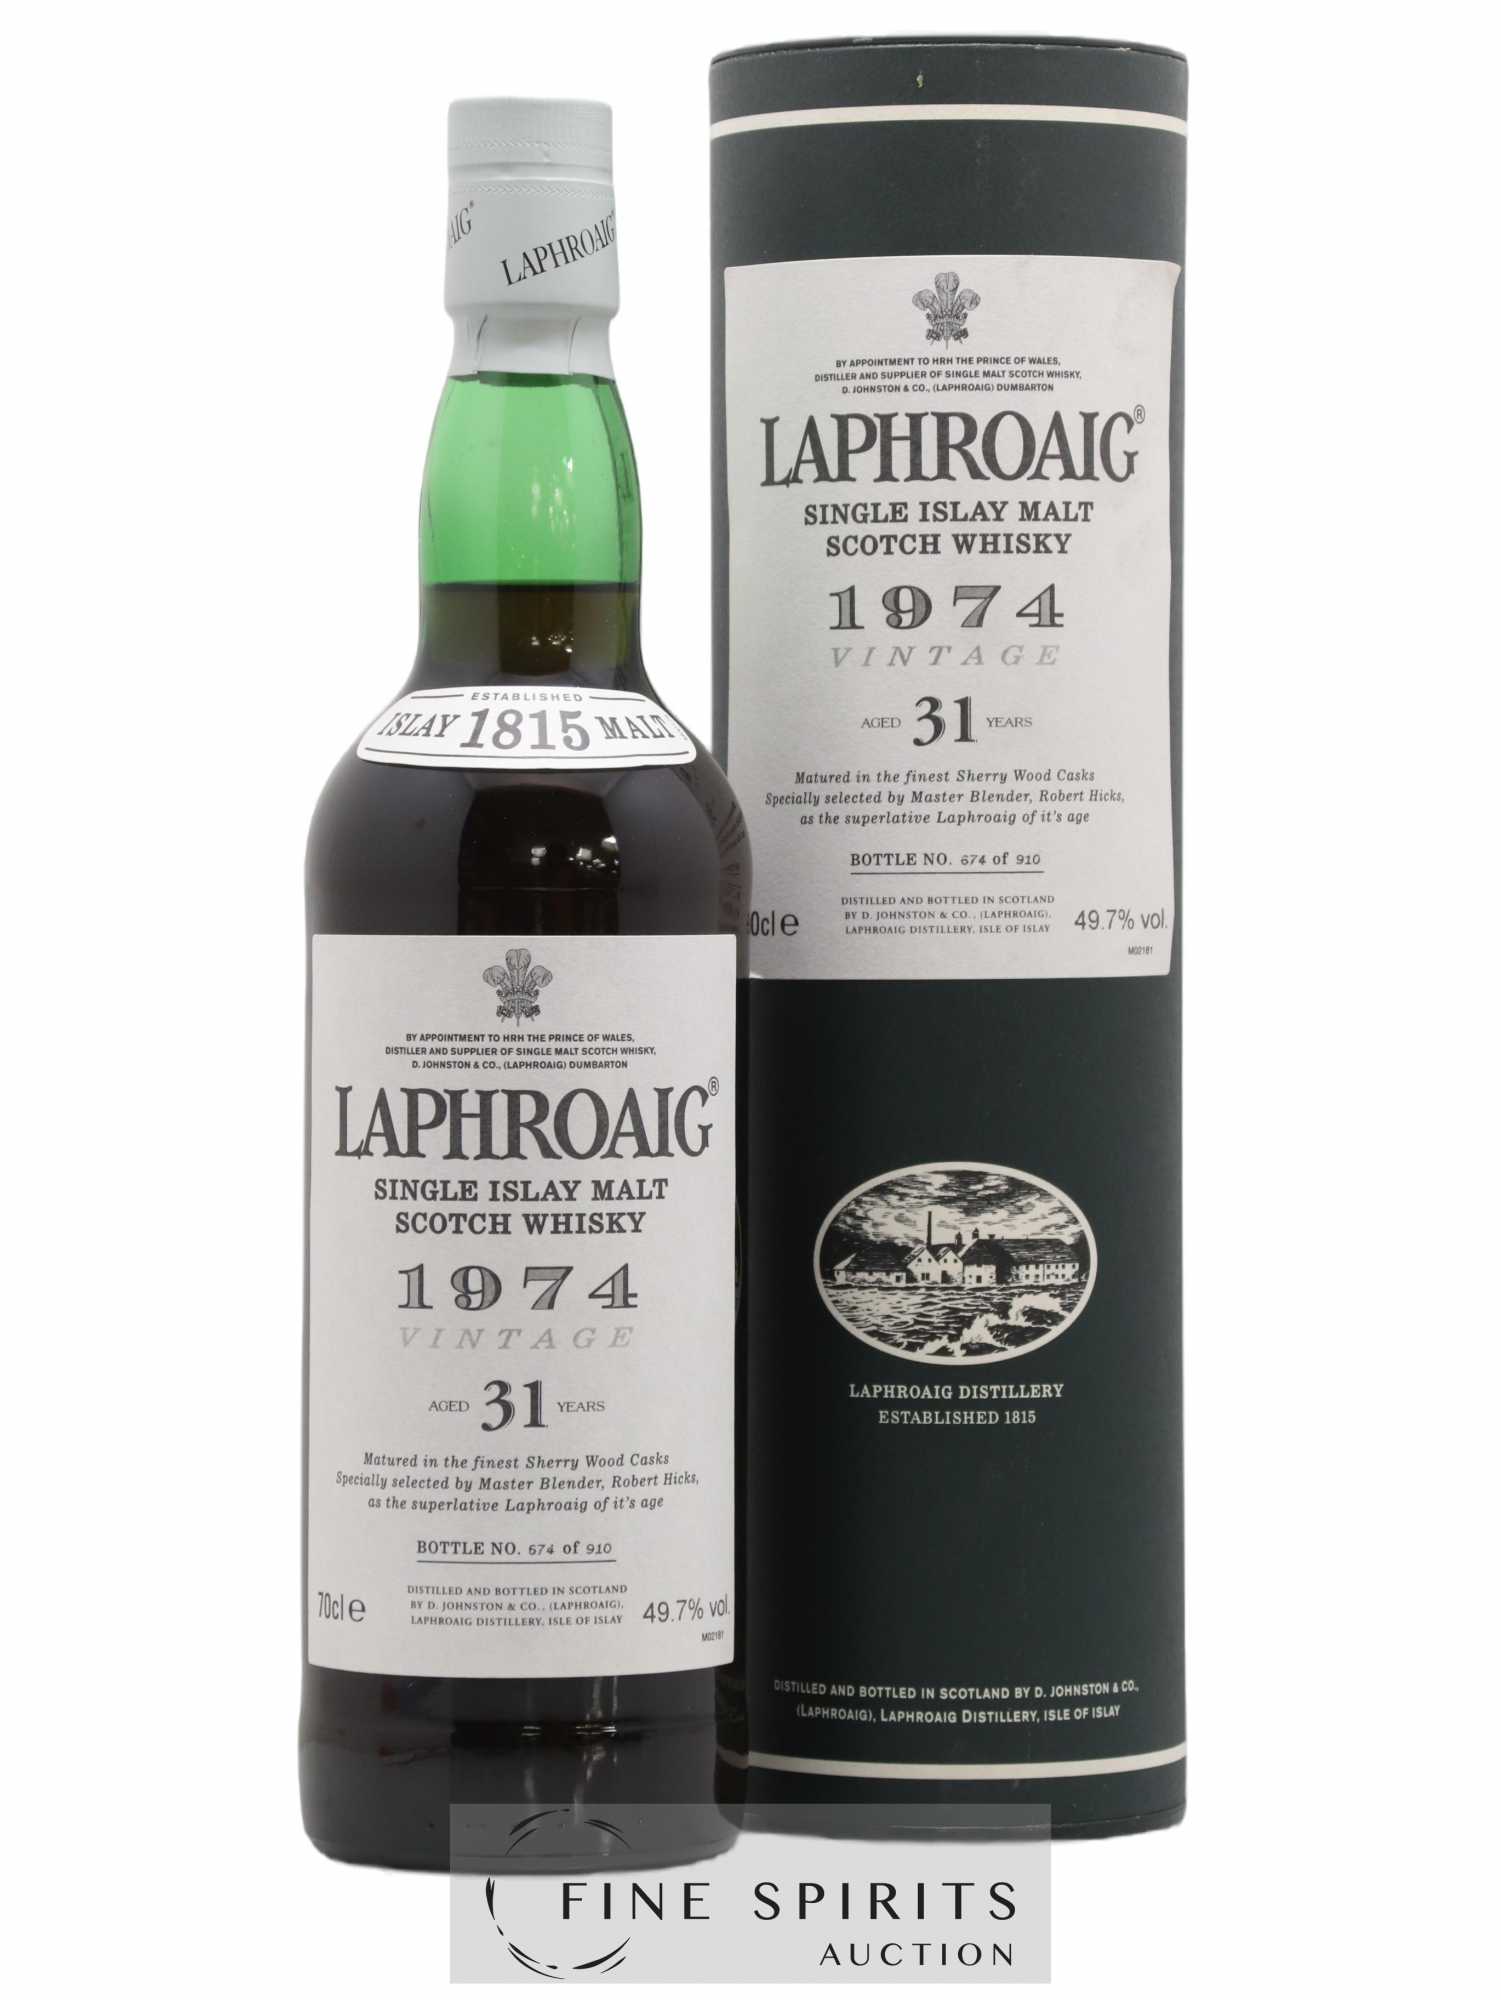 Laphroaig 31 years 1974 Of. Sherry Wood Cask - One of 910 bottles 